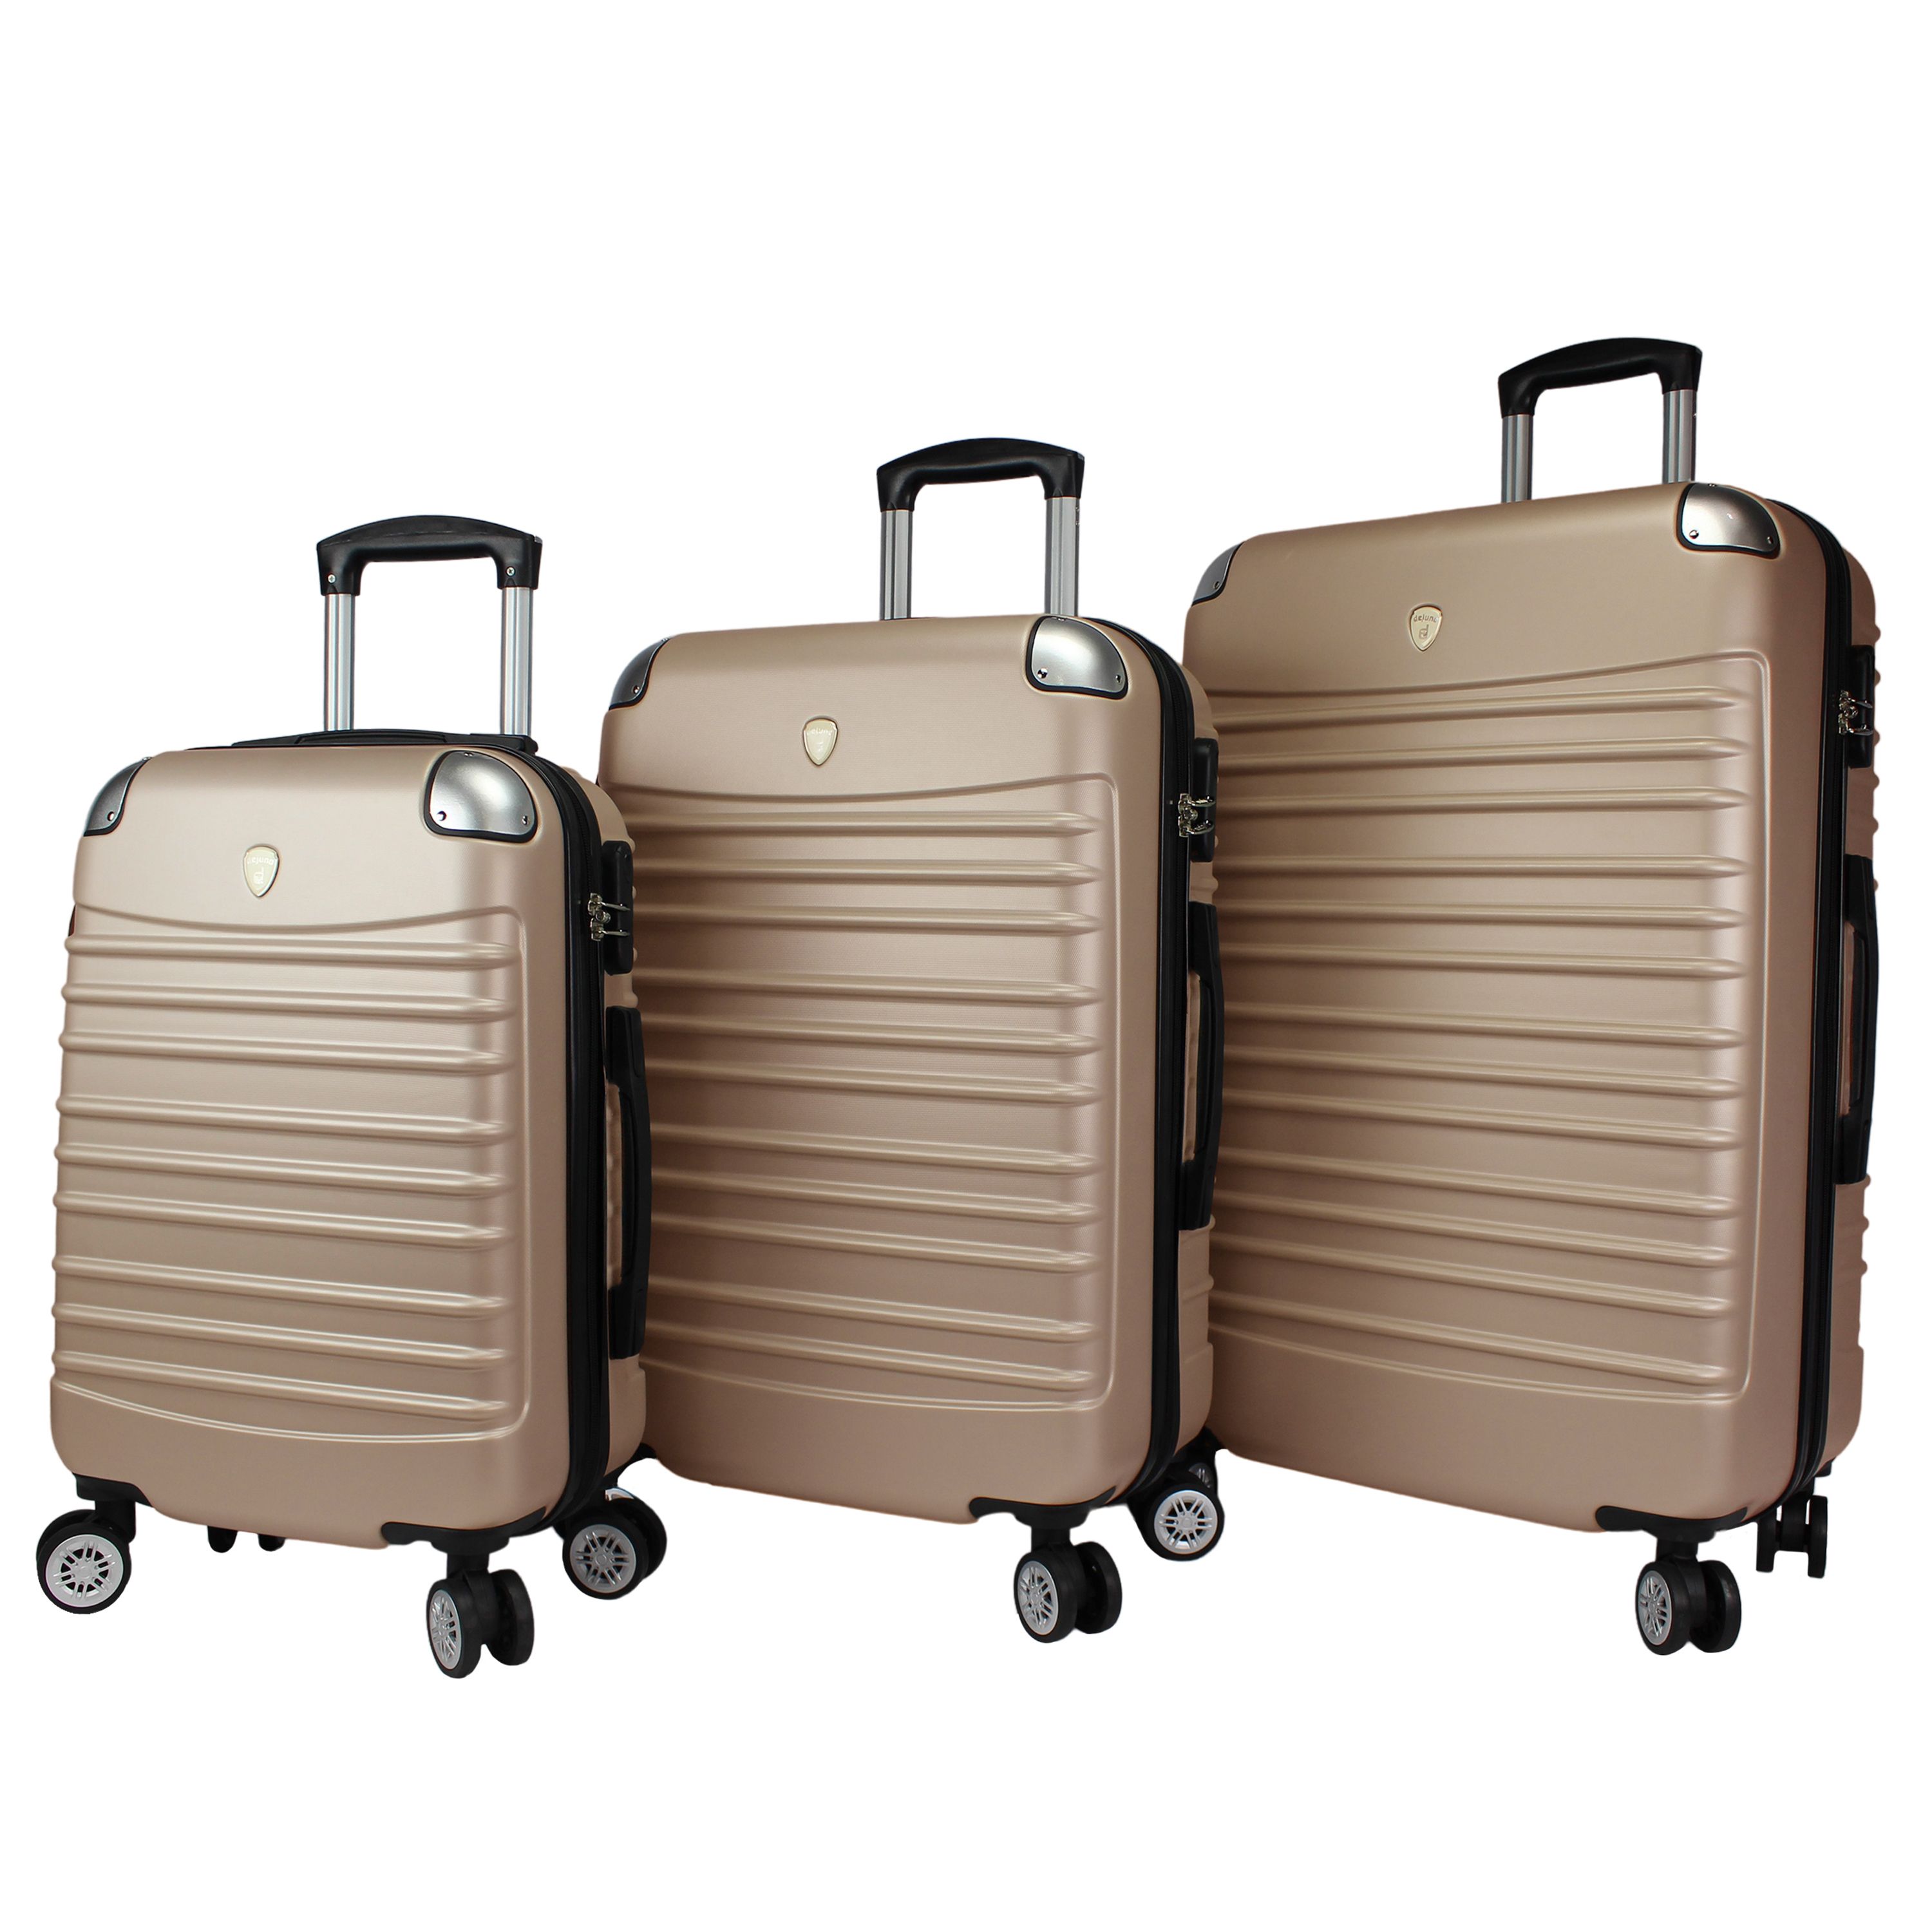 Picture of Dejuno 25DJ-610-CHAMPAGNE Impact Hardside Spinner Luggage Set - Champagne, 3 Piece